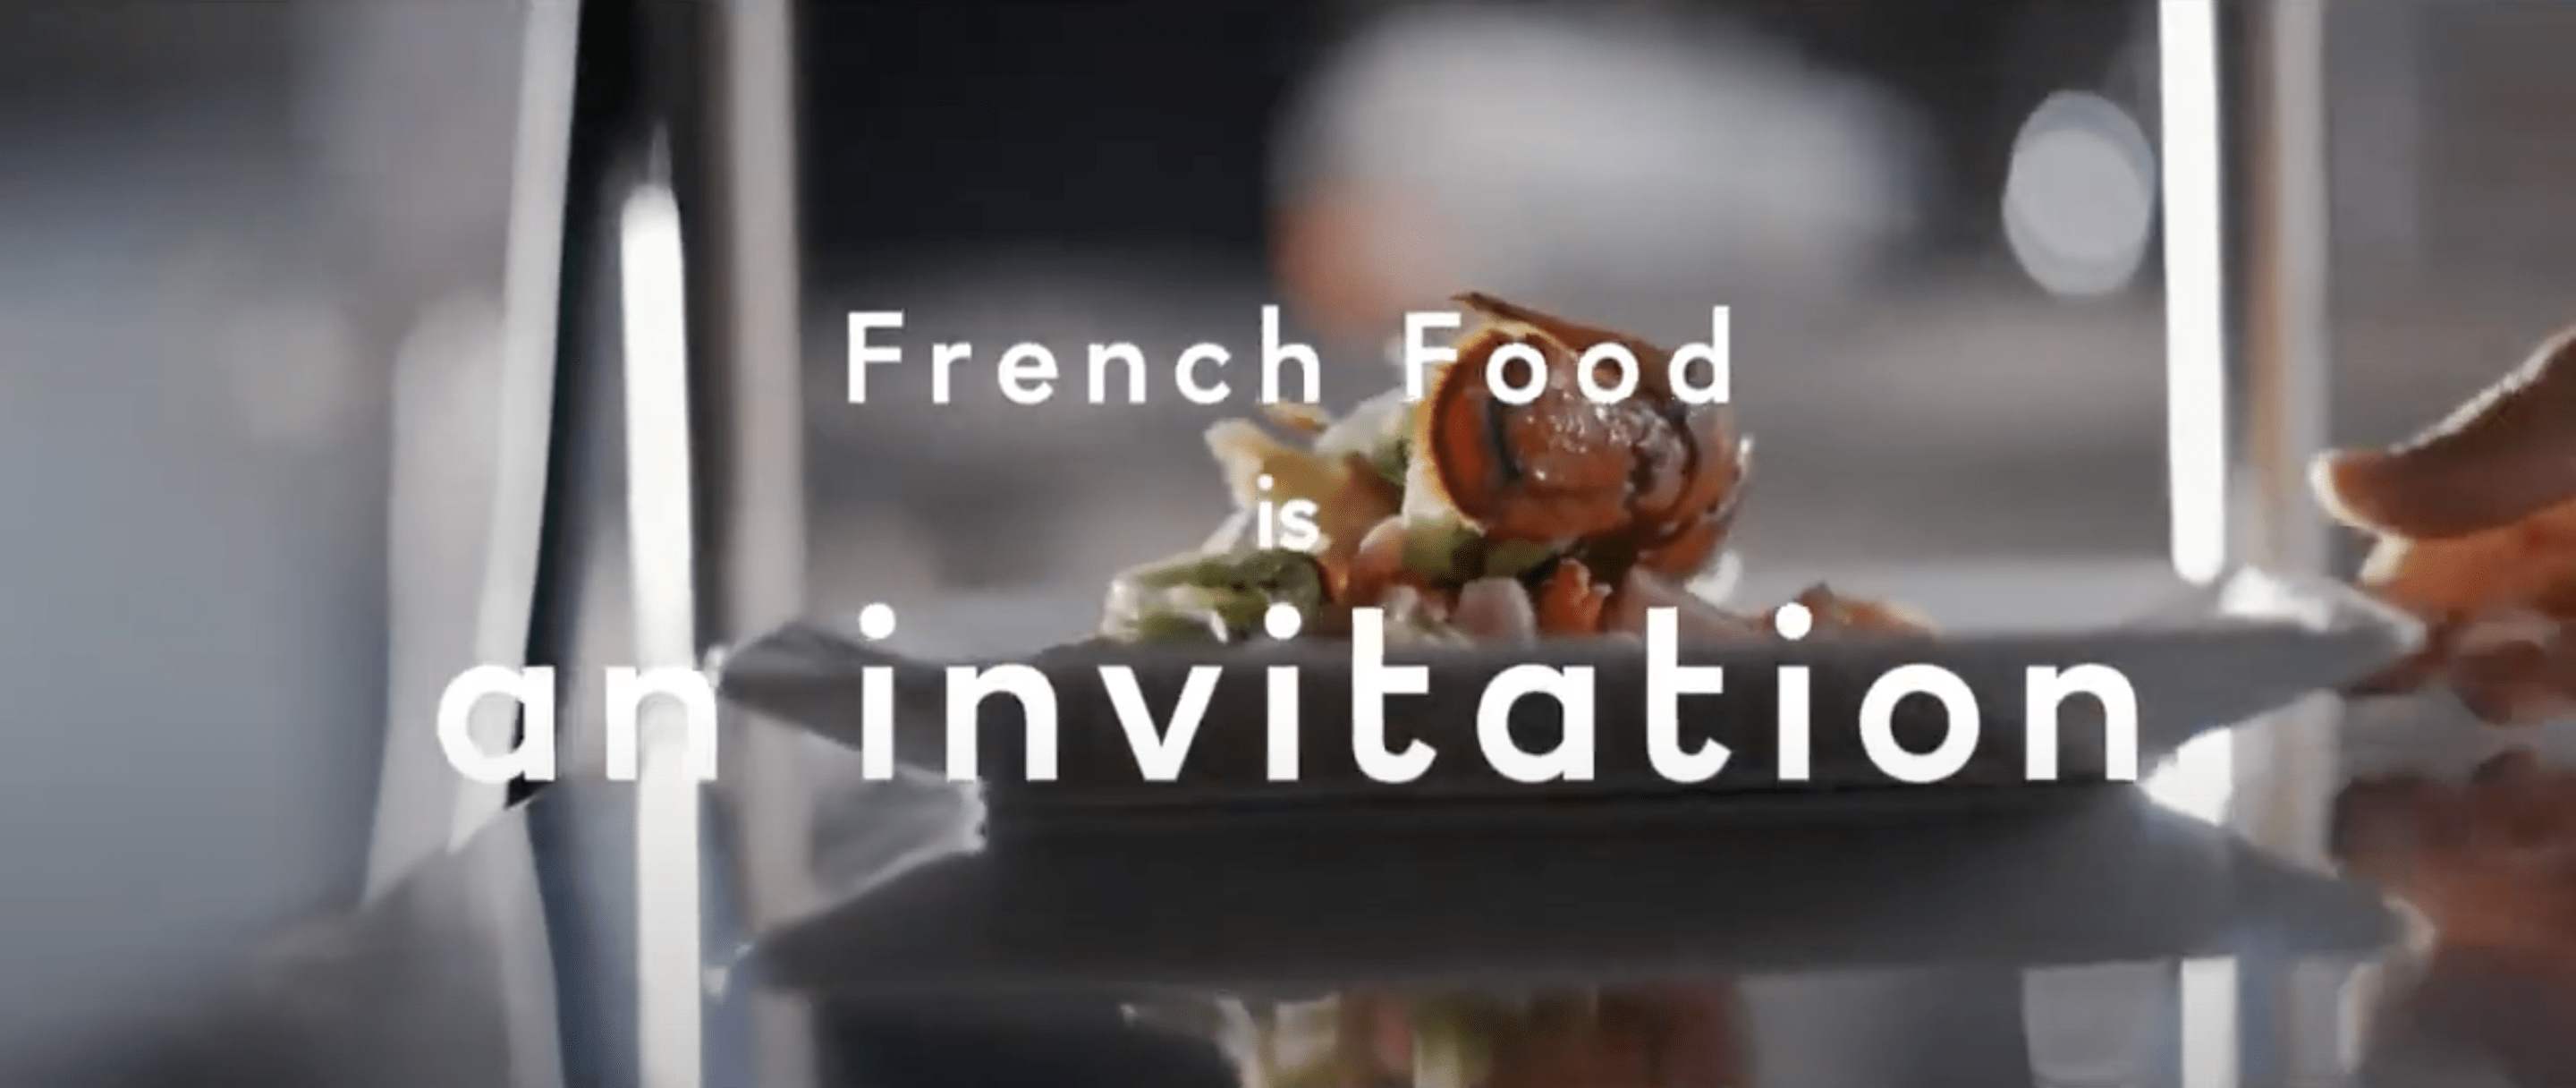 French Food is an invitation